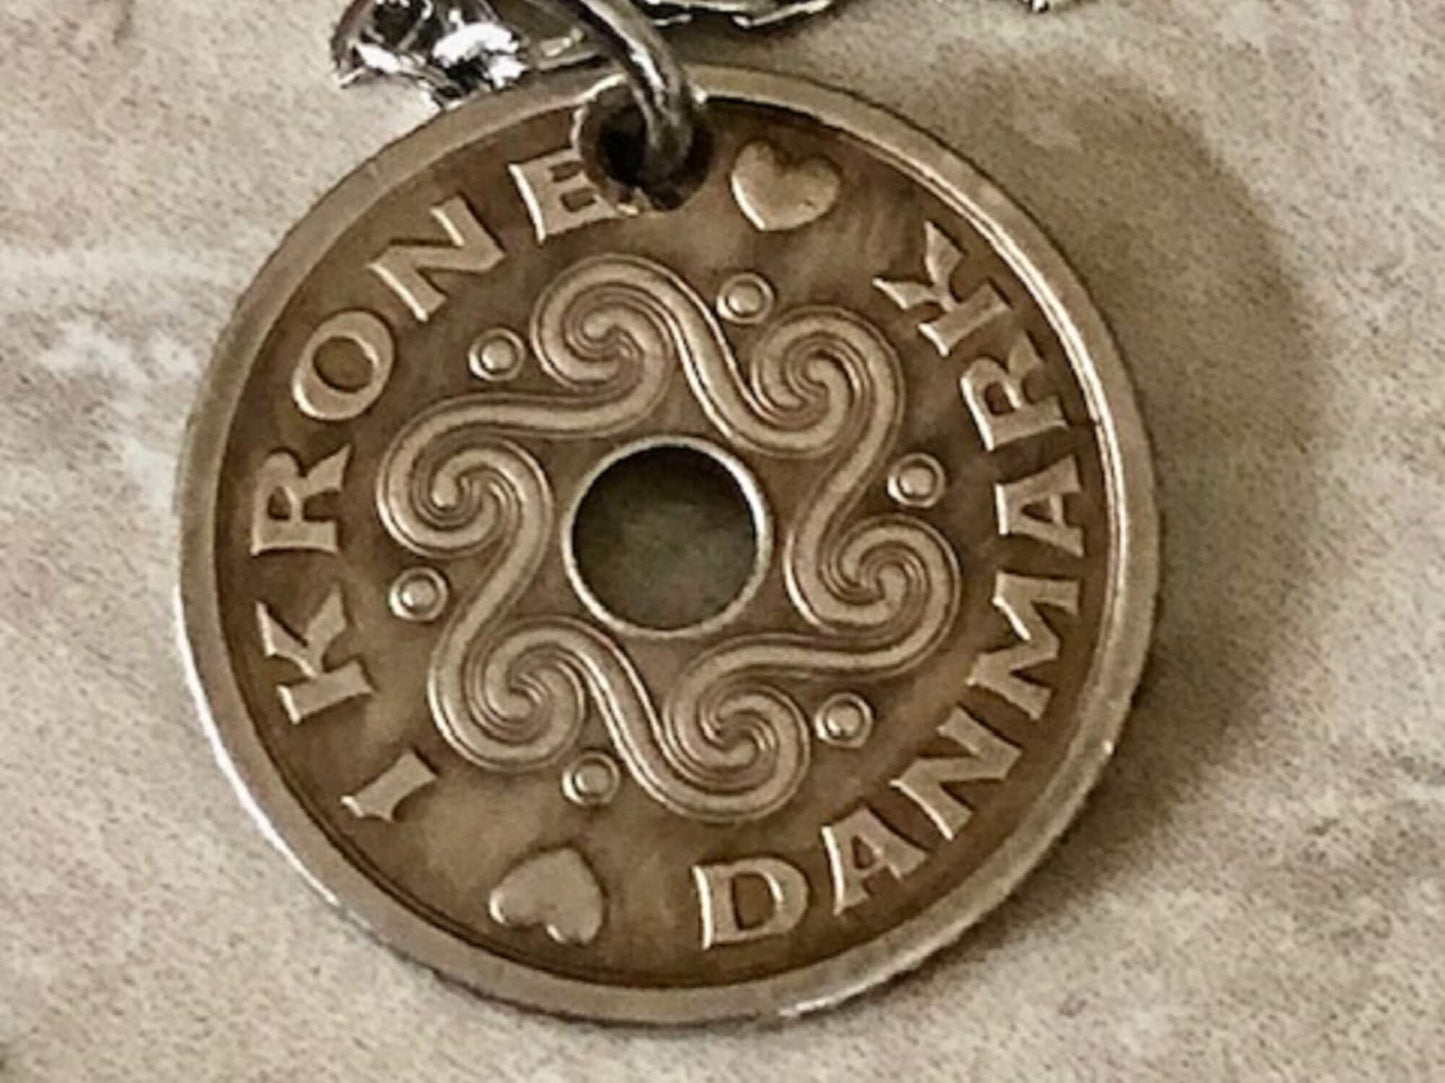 Denmark Coin Pendant 1 Kroner Danmark Personal Necklace Old Vintage Handmade Jewelry Gift Friend Charm For Him Her World Coin Collector